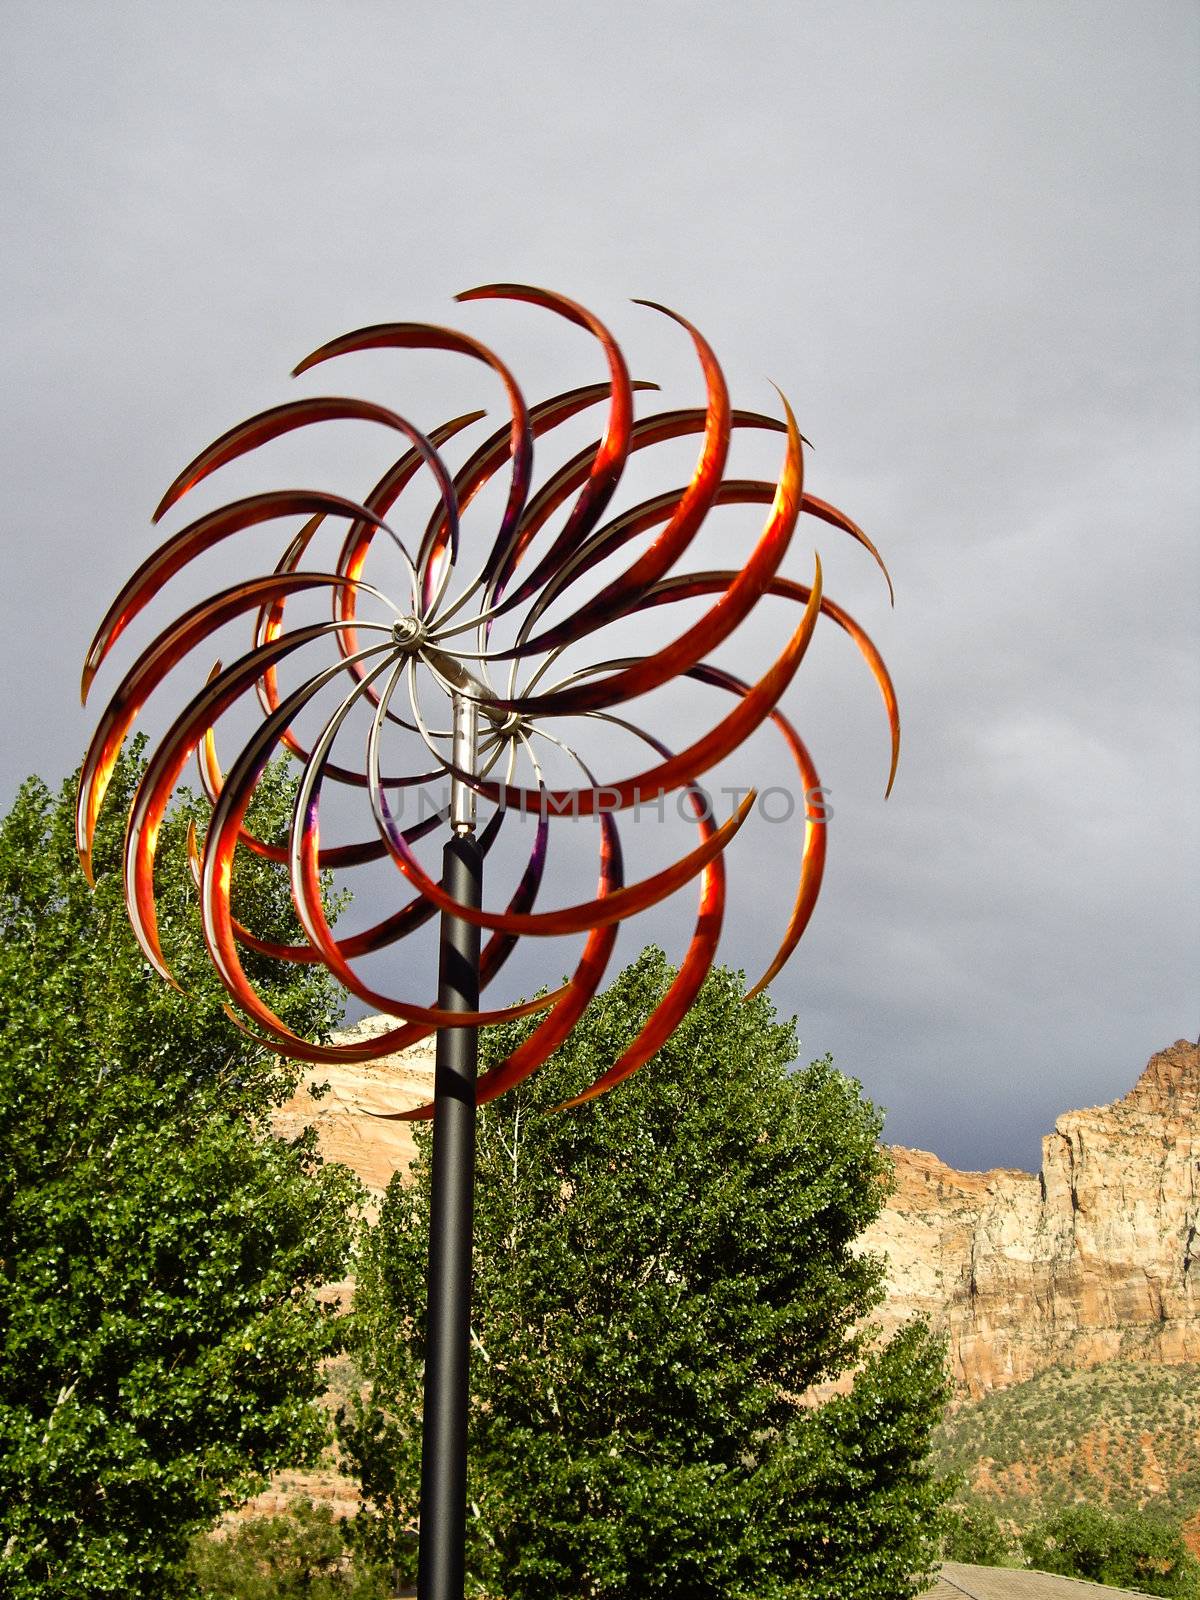 Metallic art captures the wind at Zion National Park on stormy day